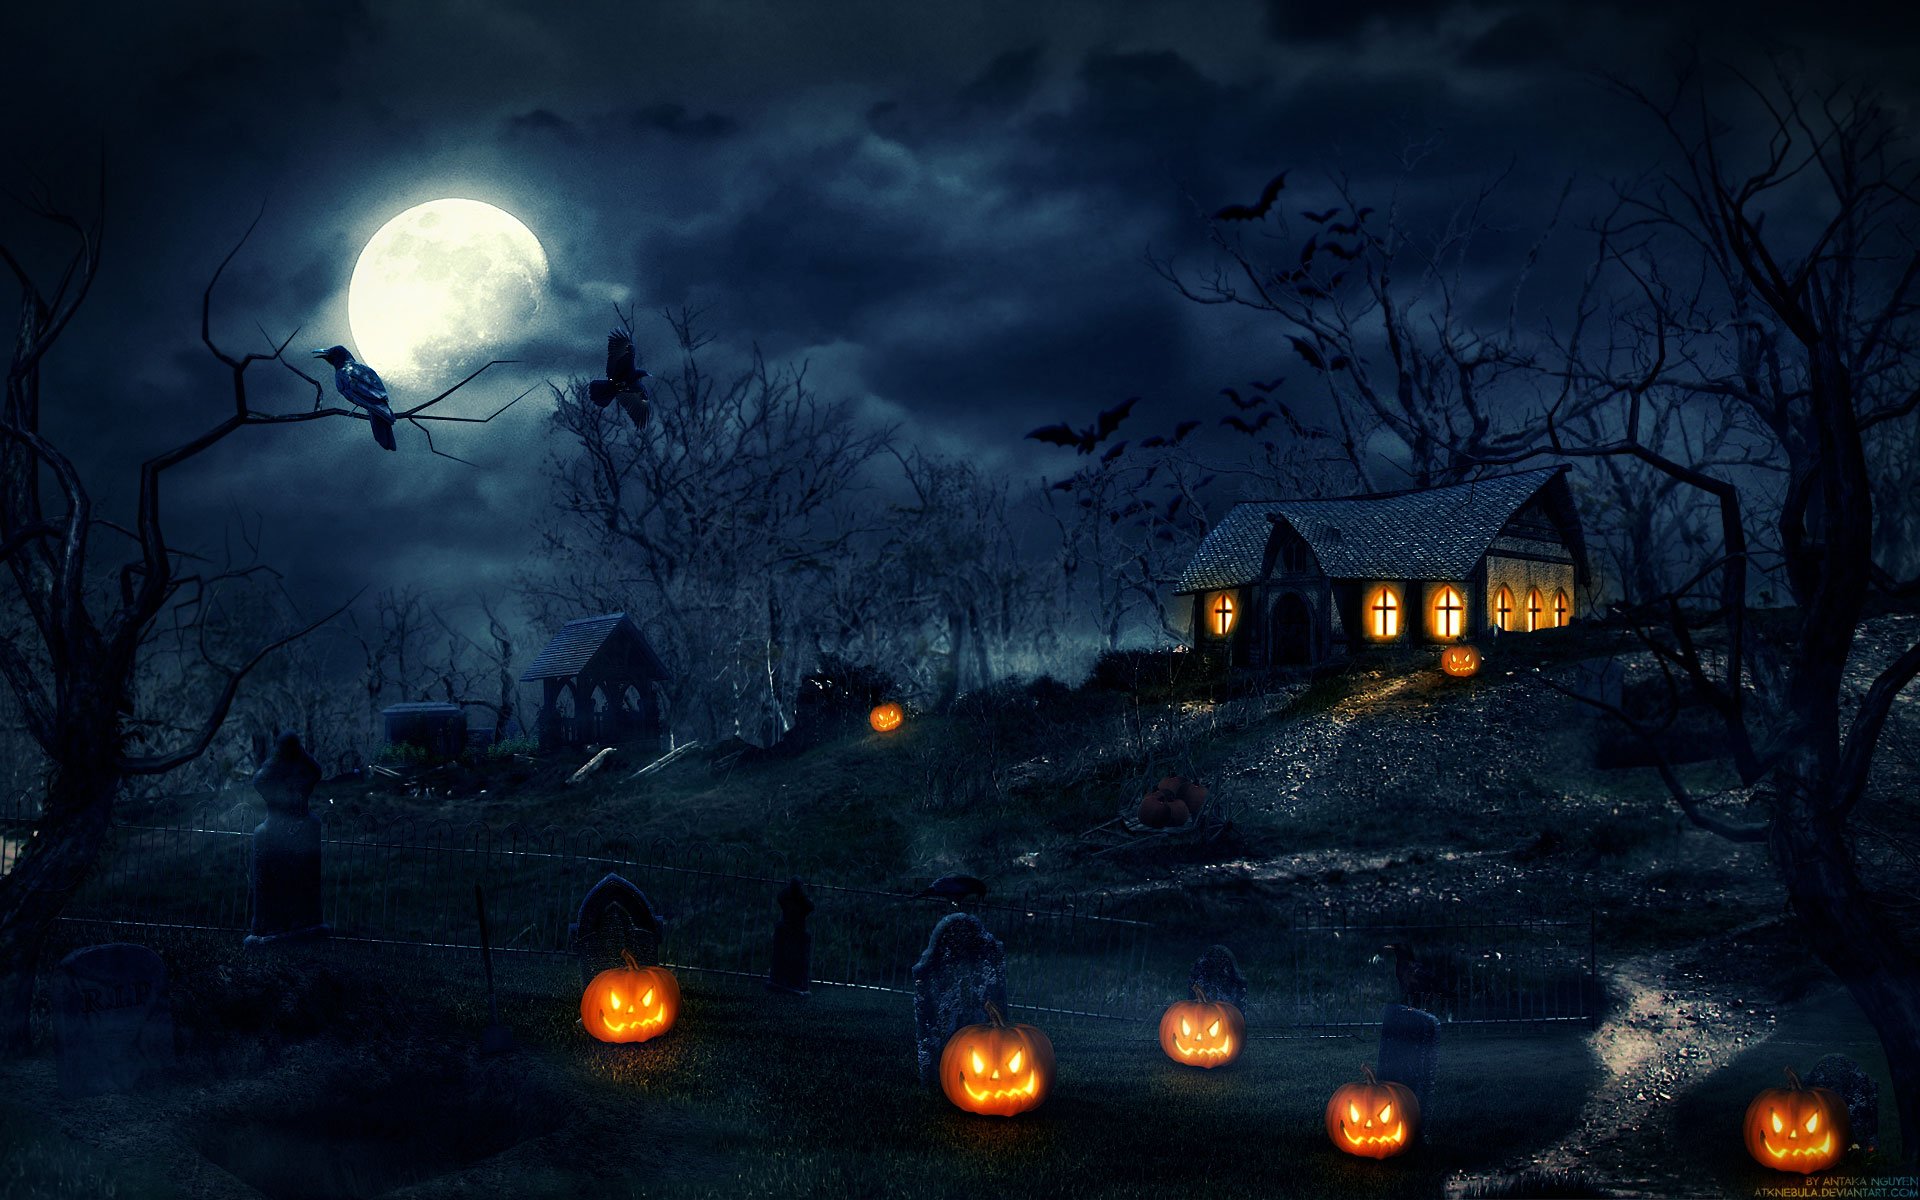  Scary Halloween Backgrounds amp Wallpaper Collection 2014 1920x1200